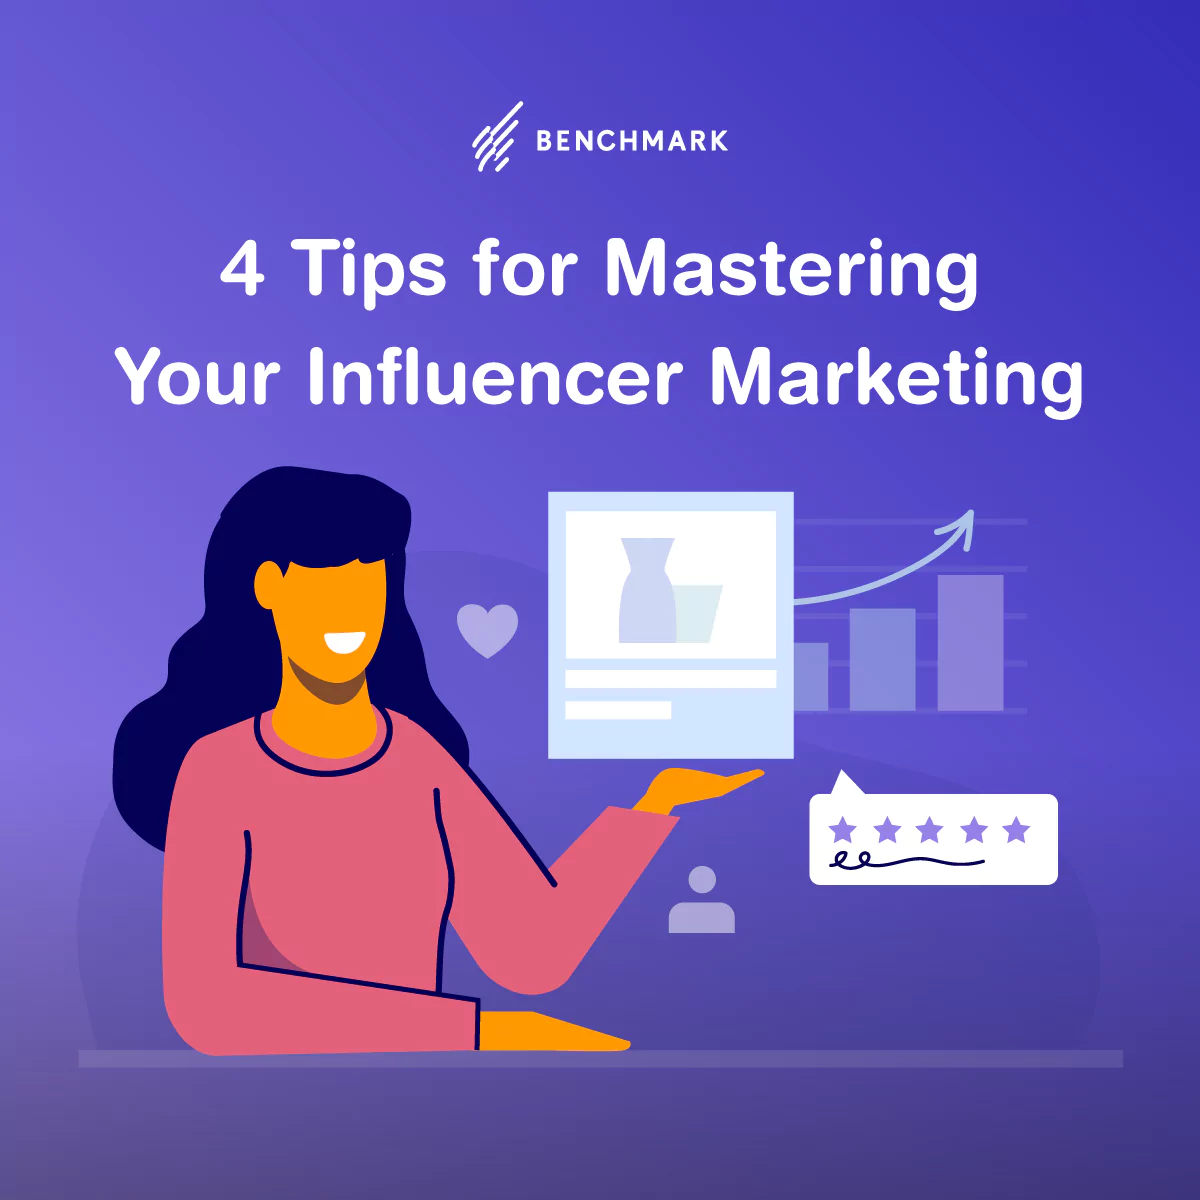 4 Tips for Mastering Your Influencer Marketing